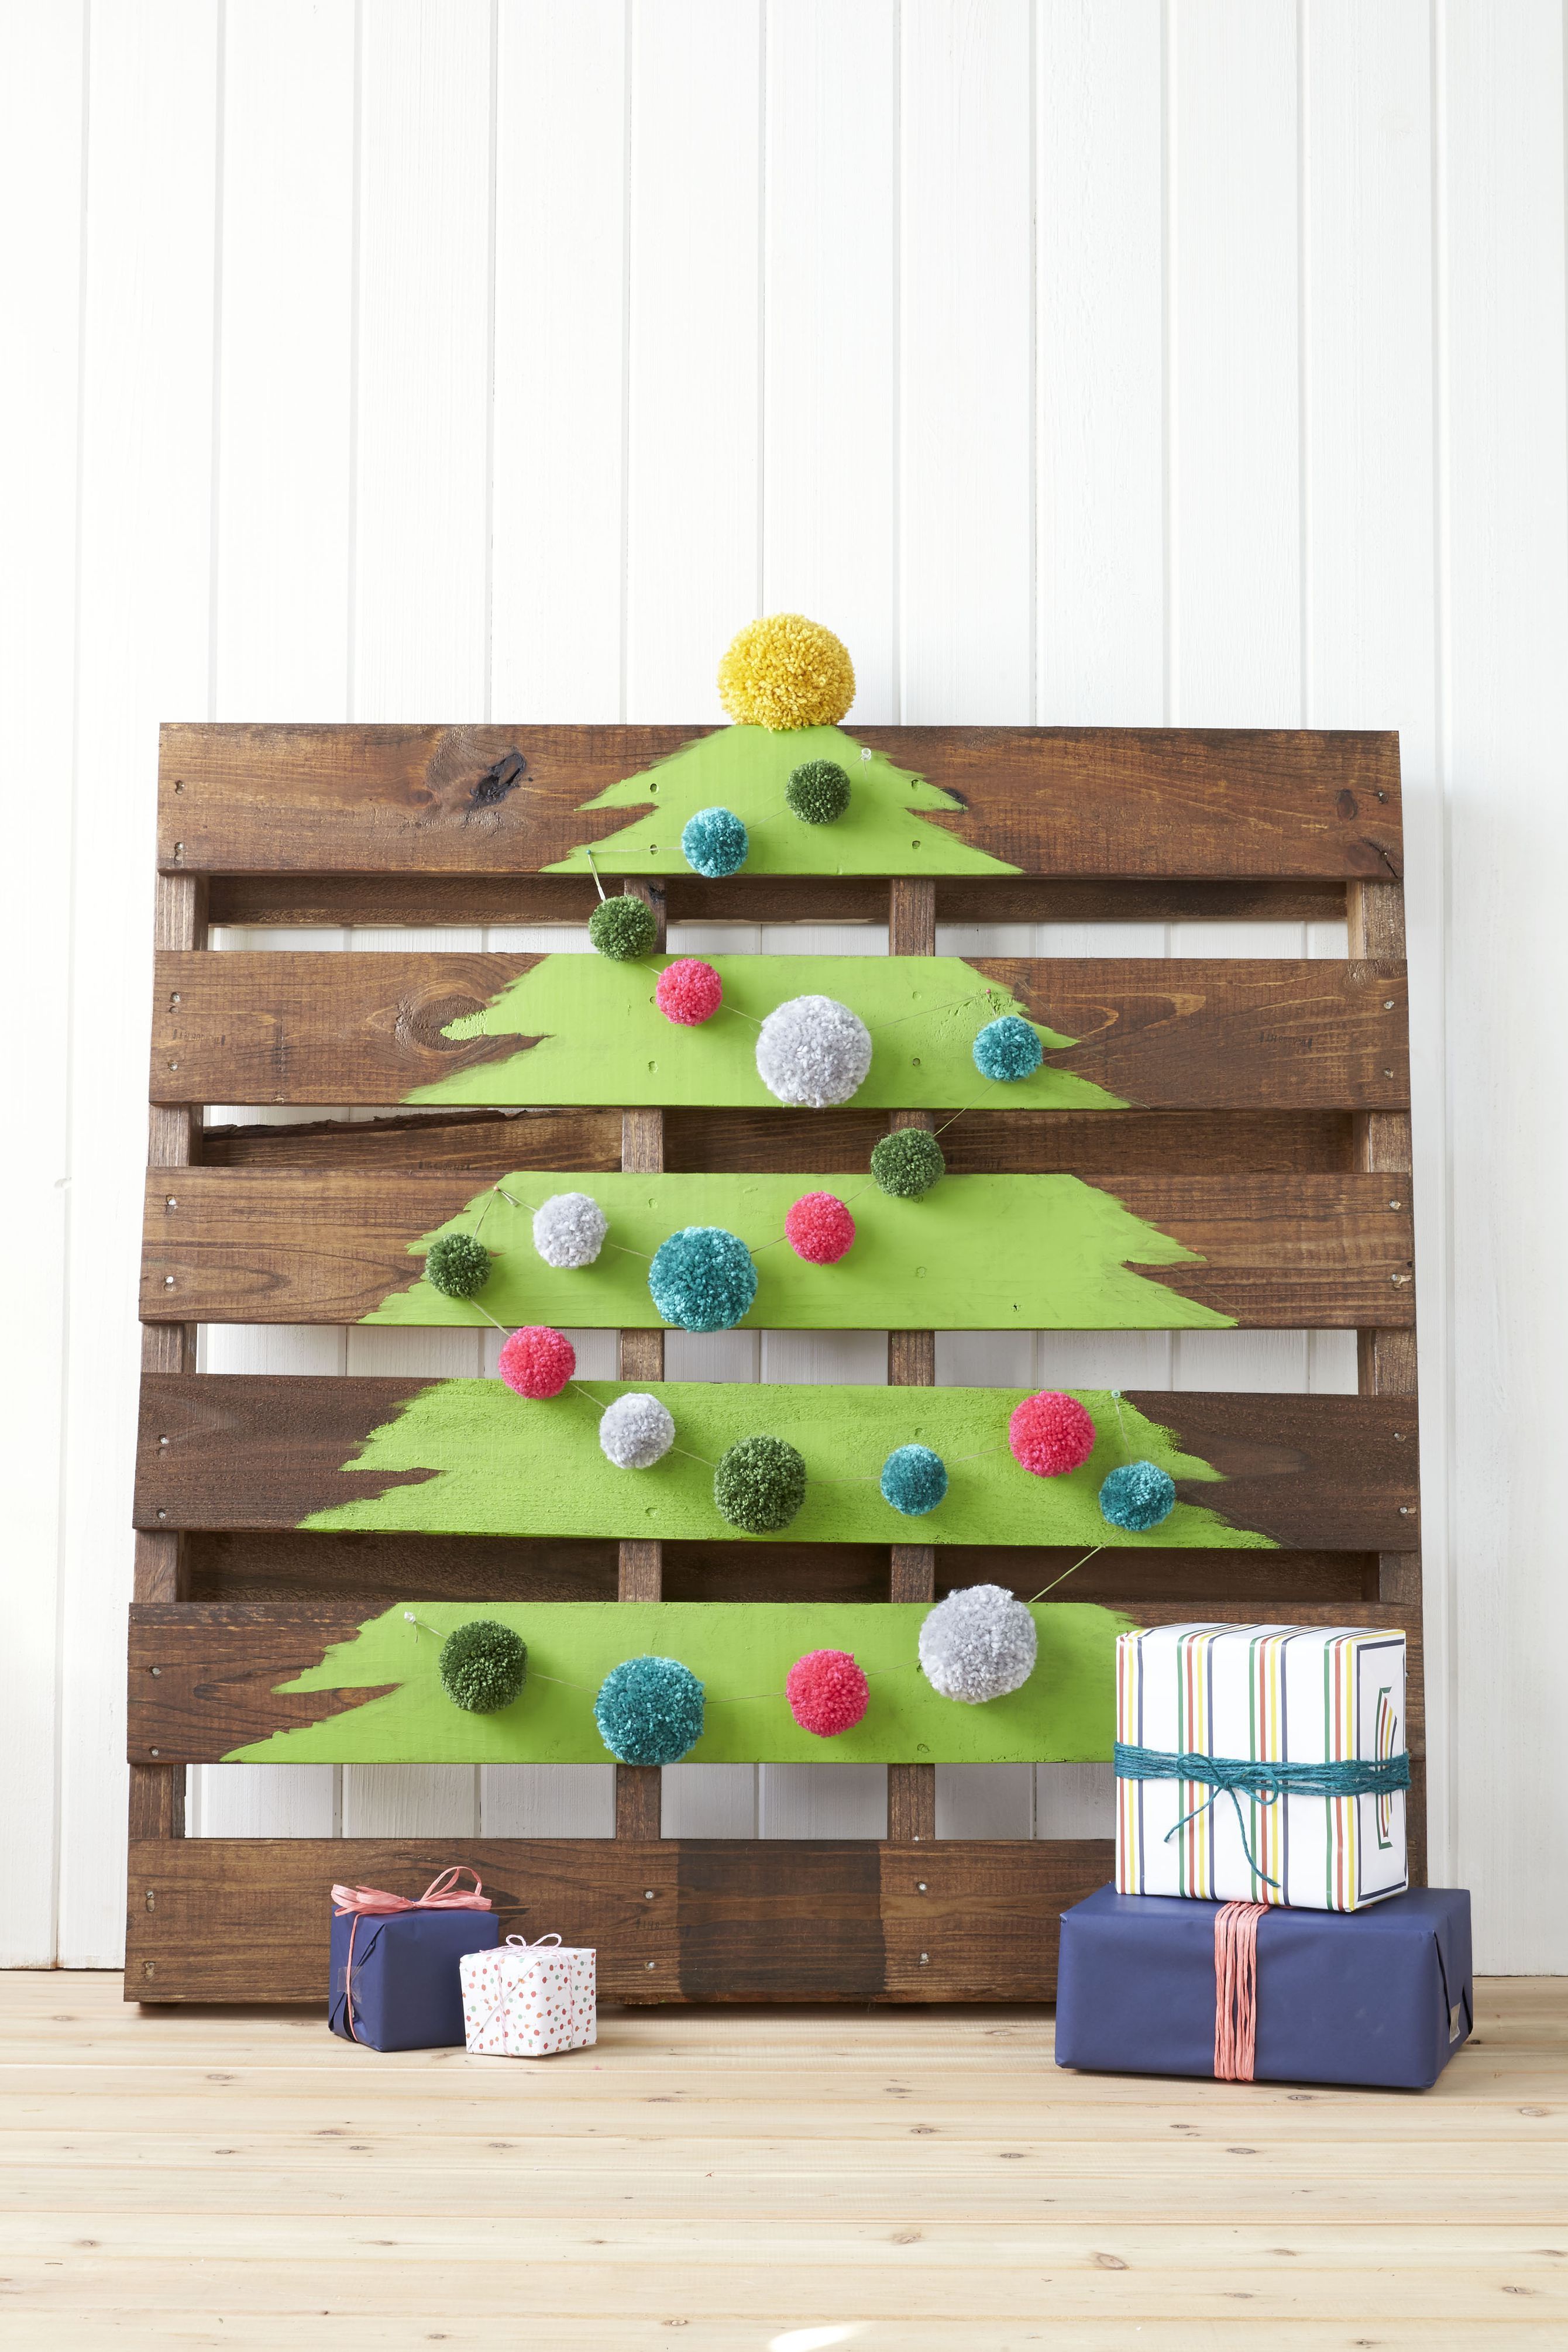 25 Best Christmas Wood Crafts - DIY Holiday Wood Projects and Ideas